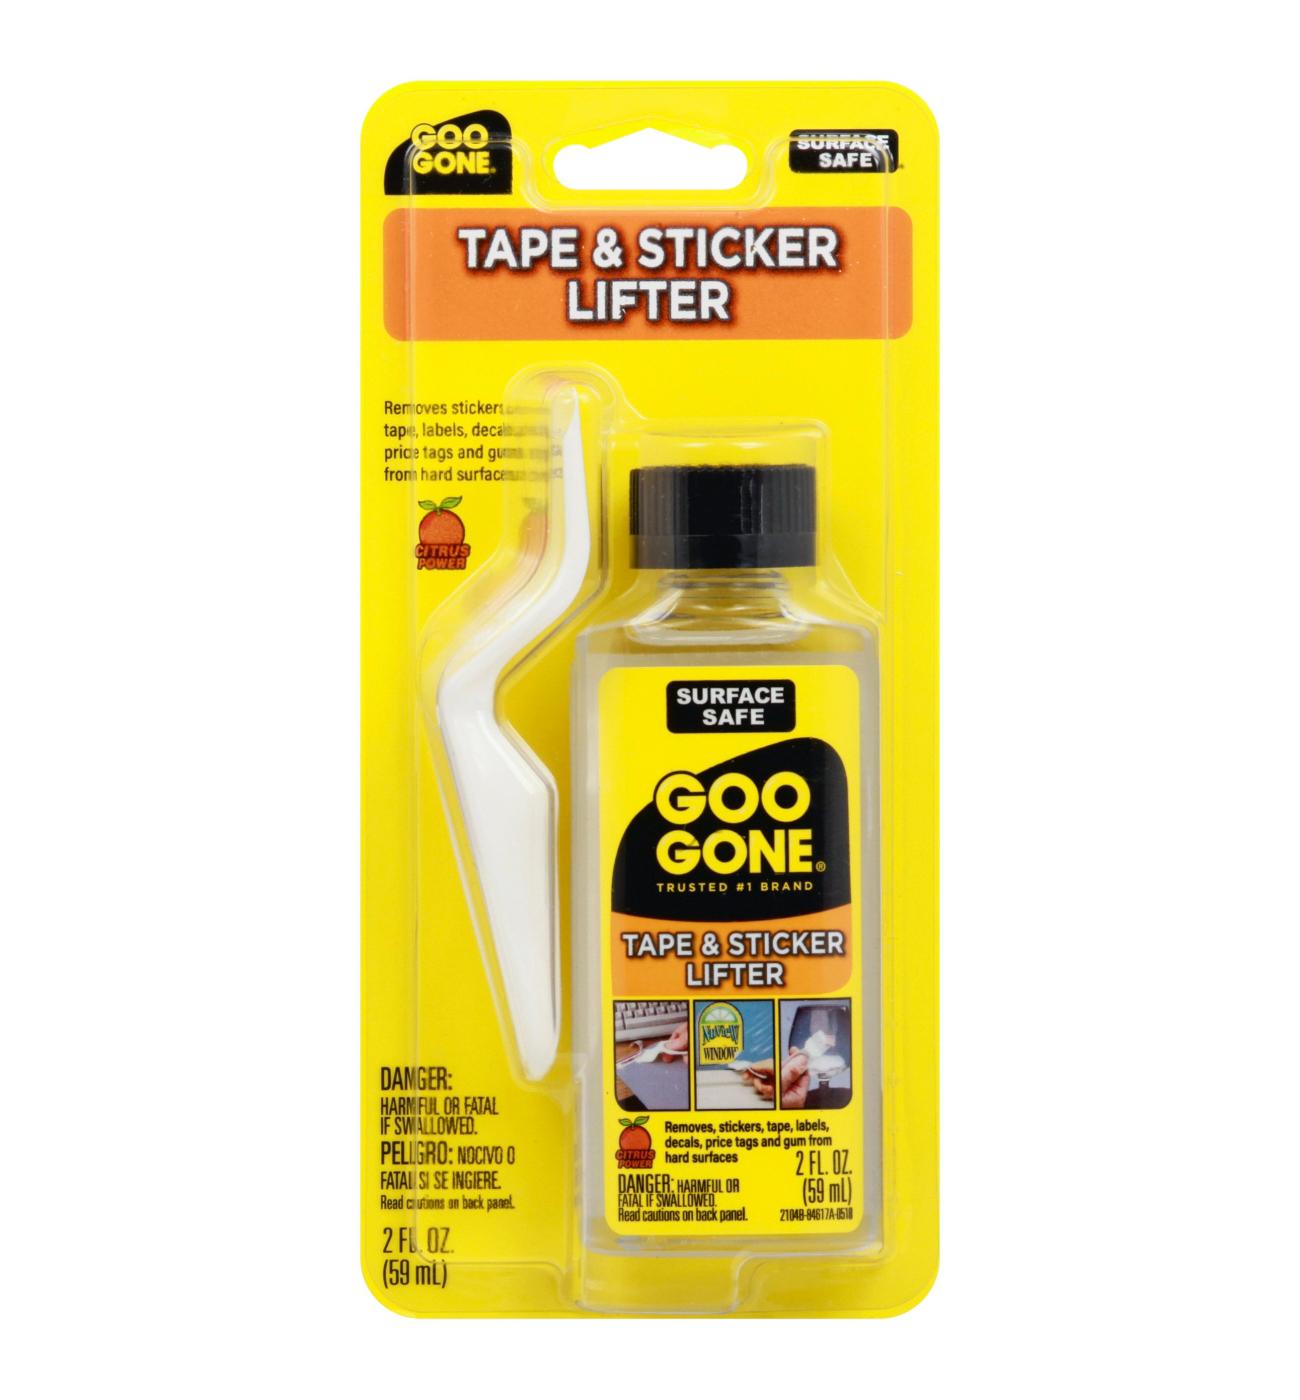 Goof Off Citrus Strength Stain Remover - Shop Adhesives & Tape at H-E-B